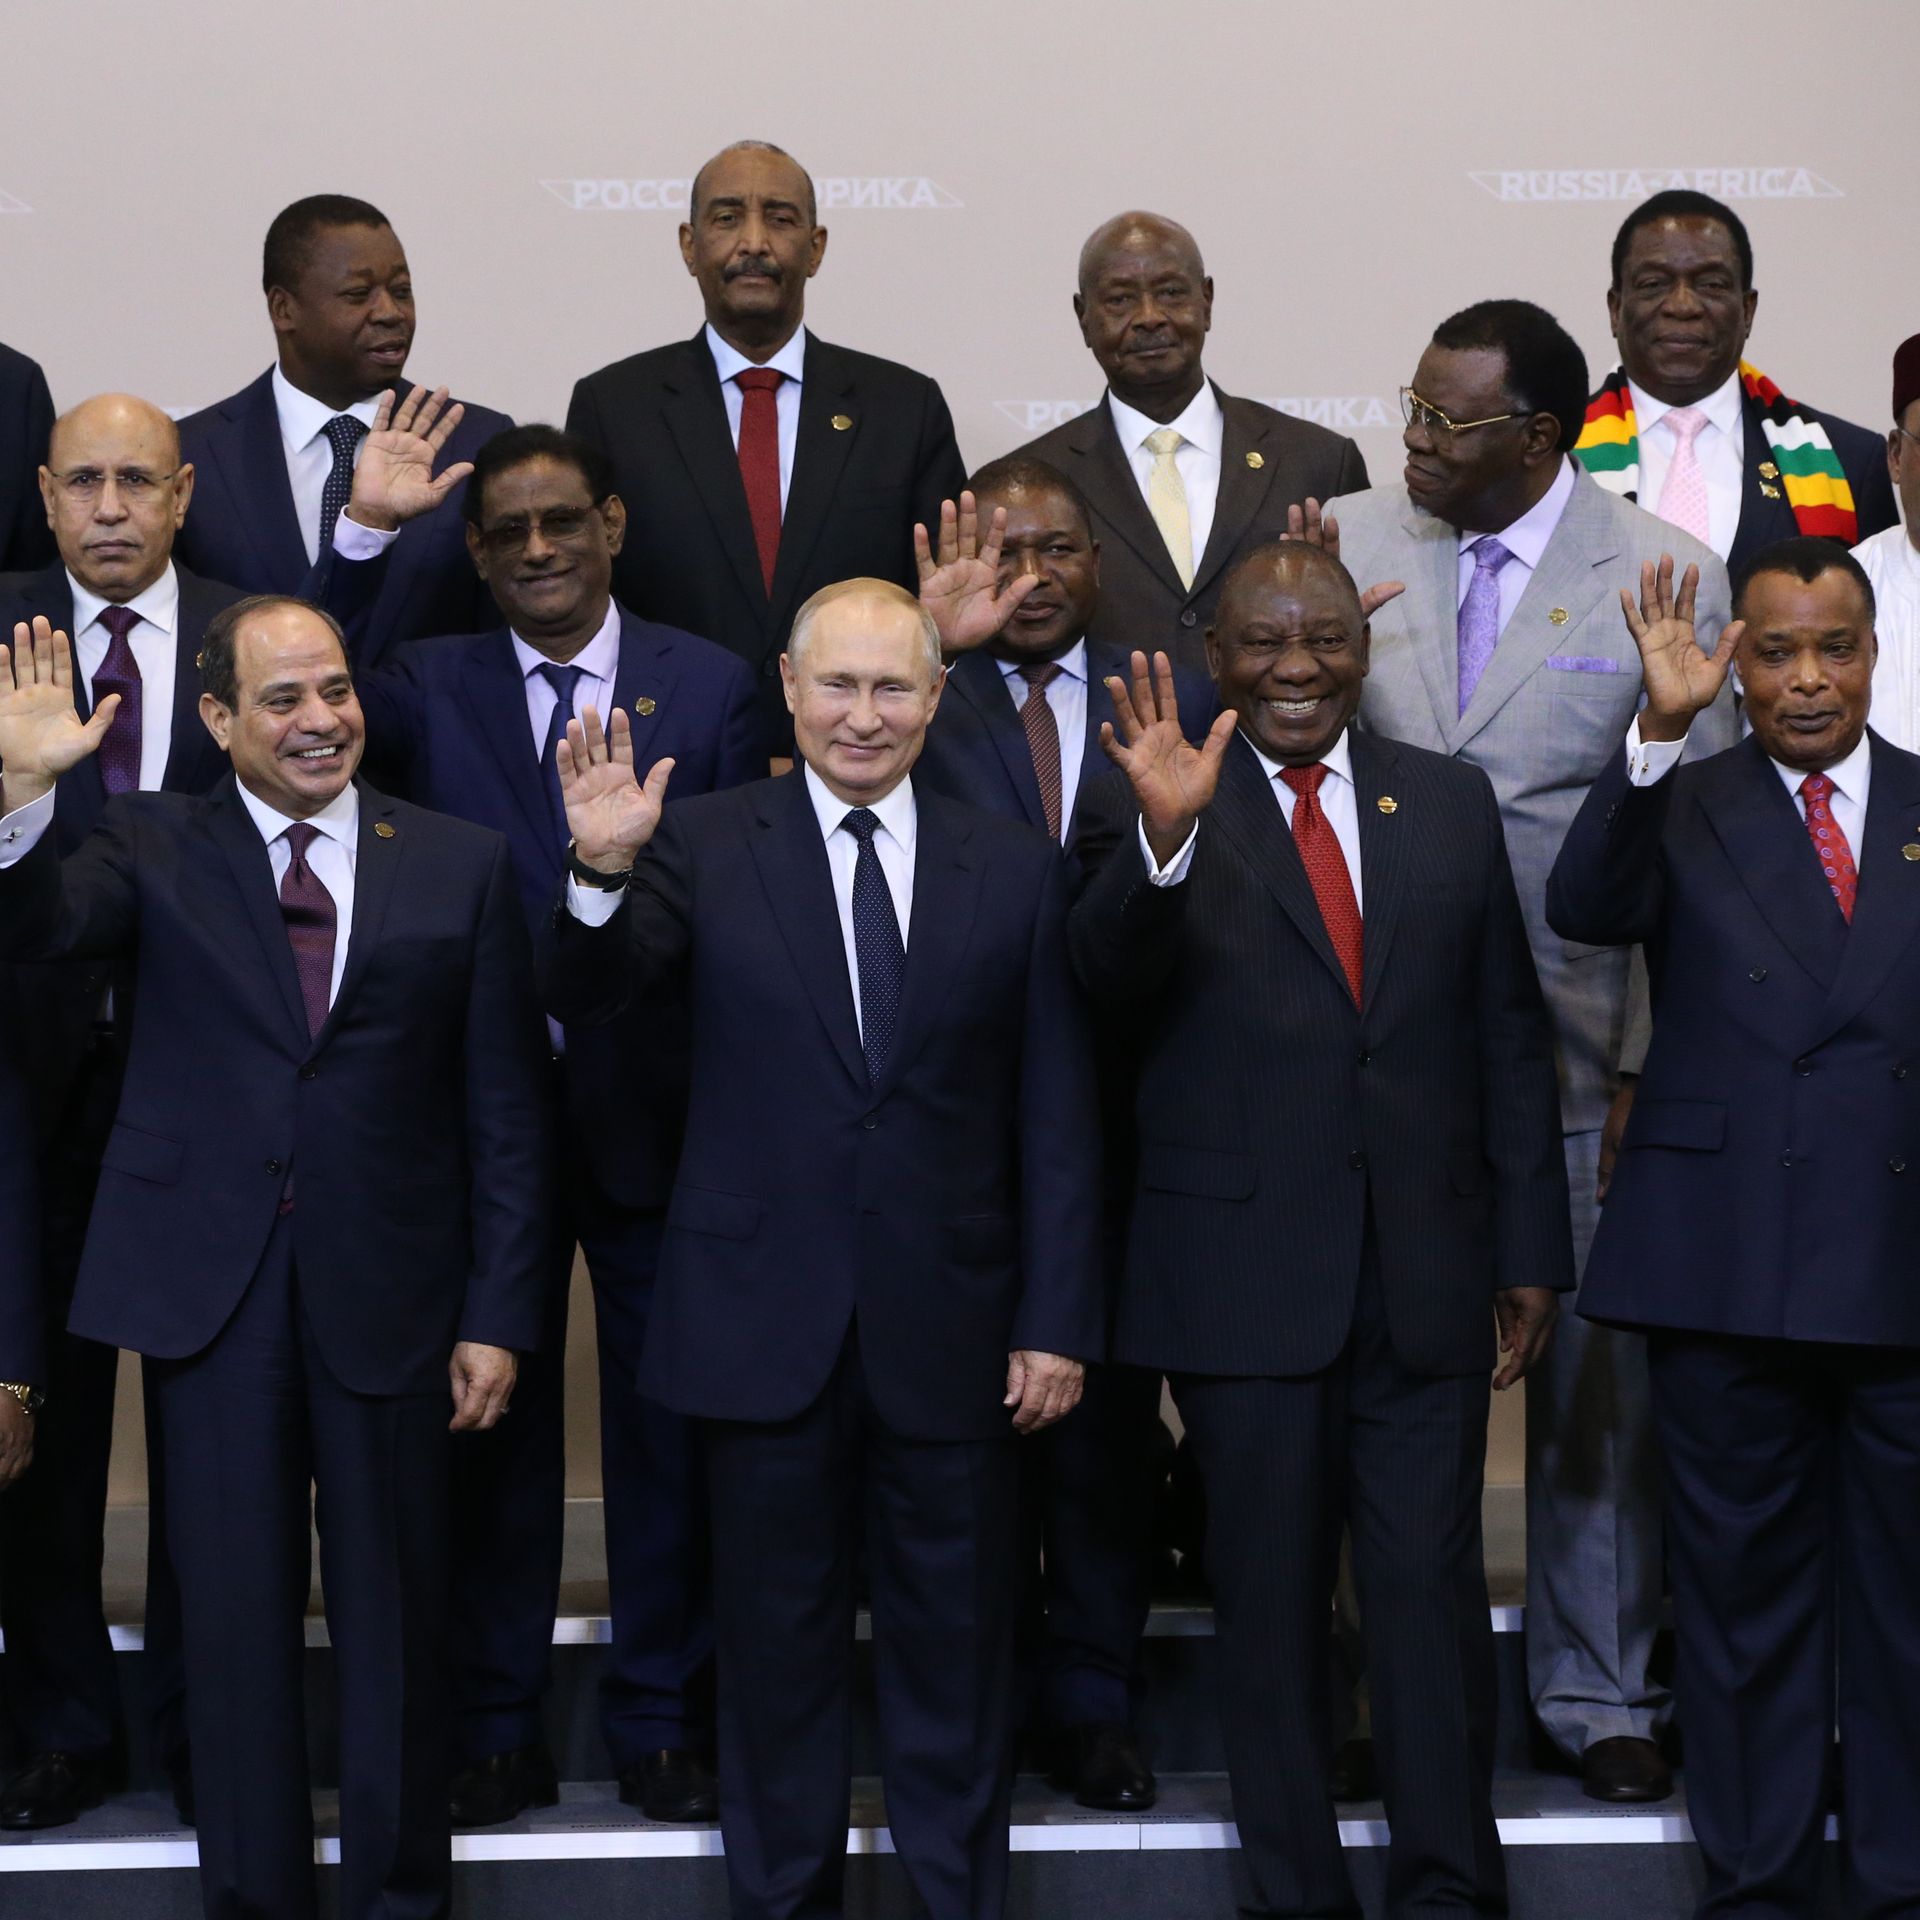 Putin and African leaders gathered and waving